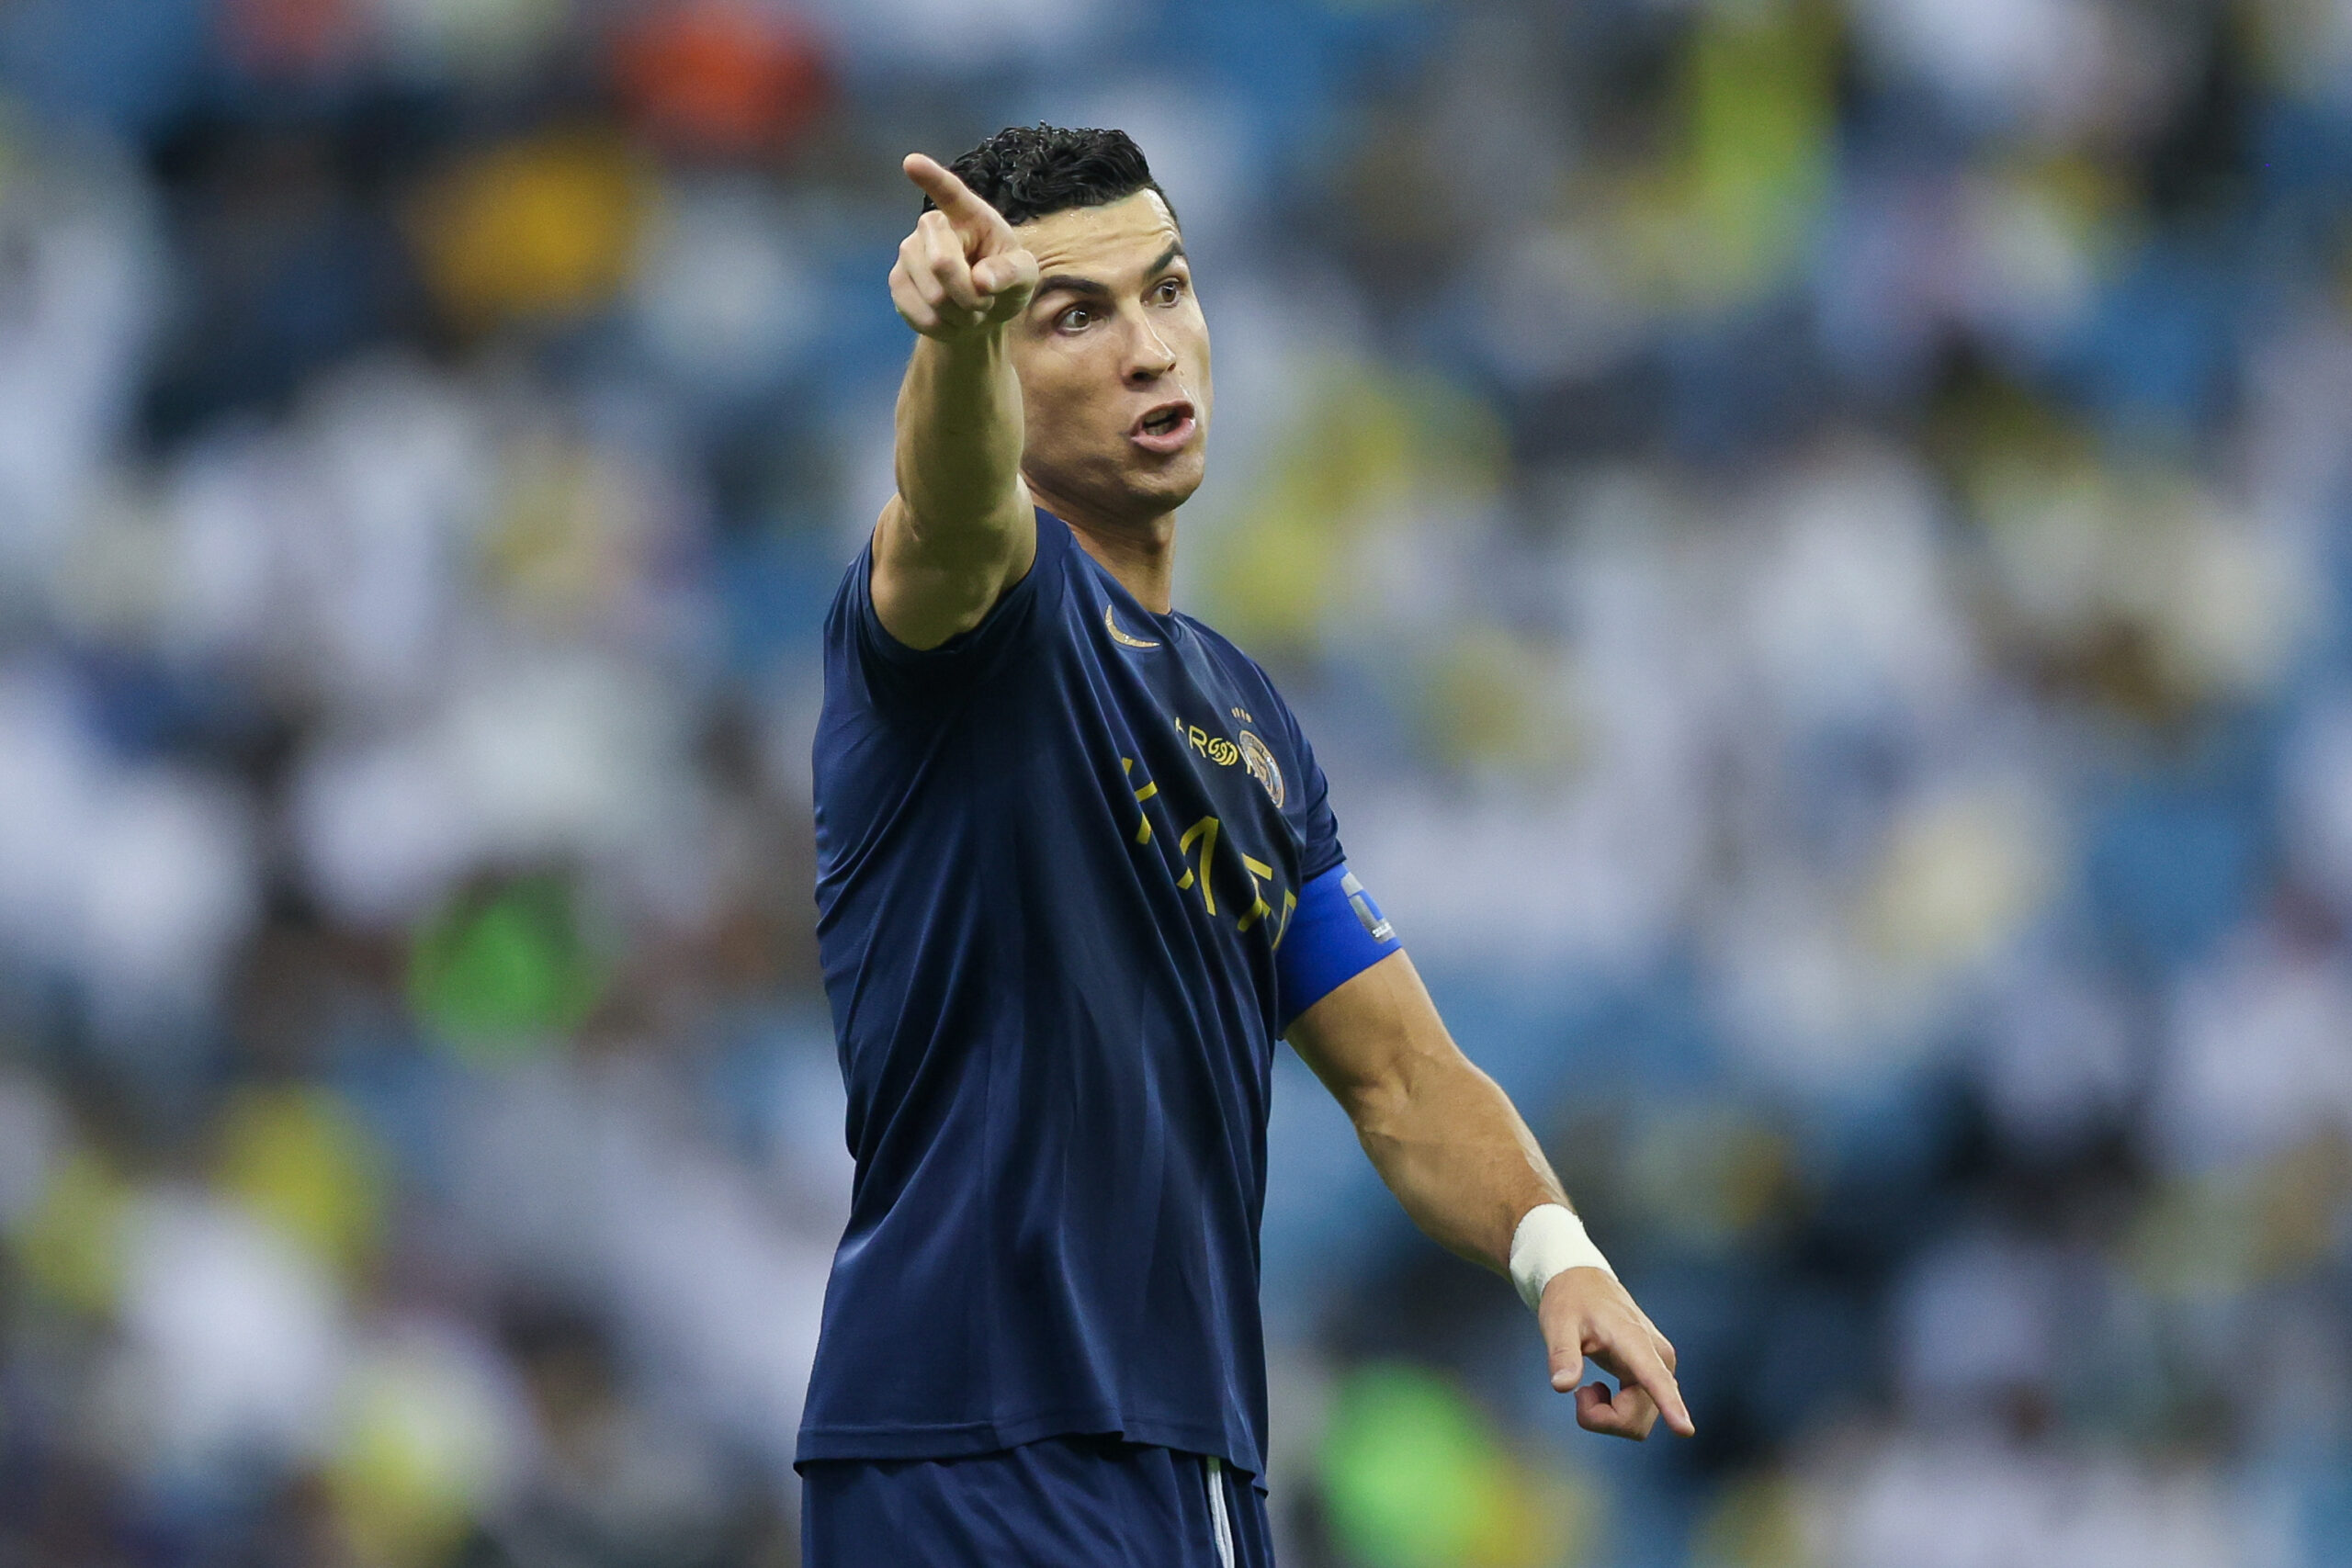 cristiano-and-benzema-went-to-the-quarterfinals-in-the-king's-cup-in-saudi-arabia-[video]